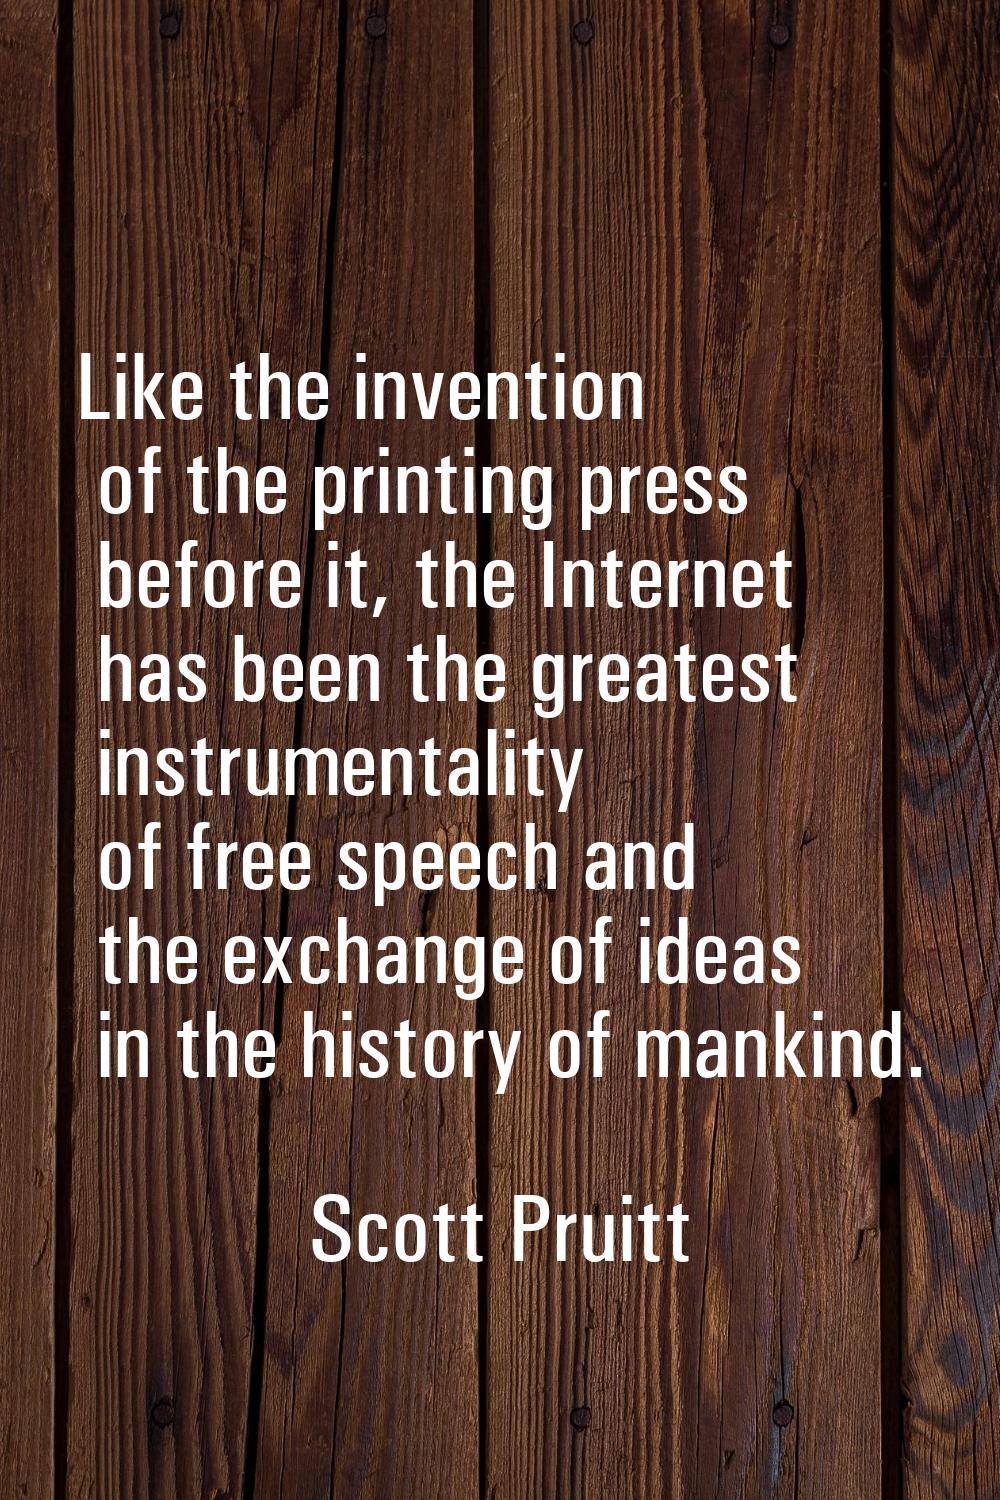 Like the invention of the printing press before it, the Internet has been the greatest instrumental